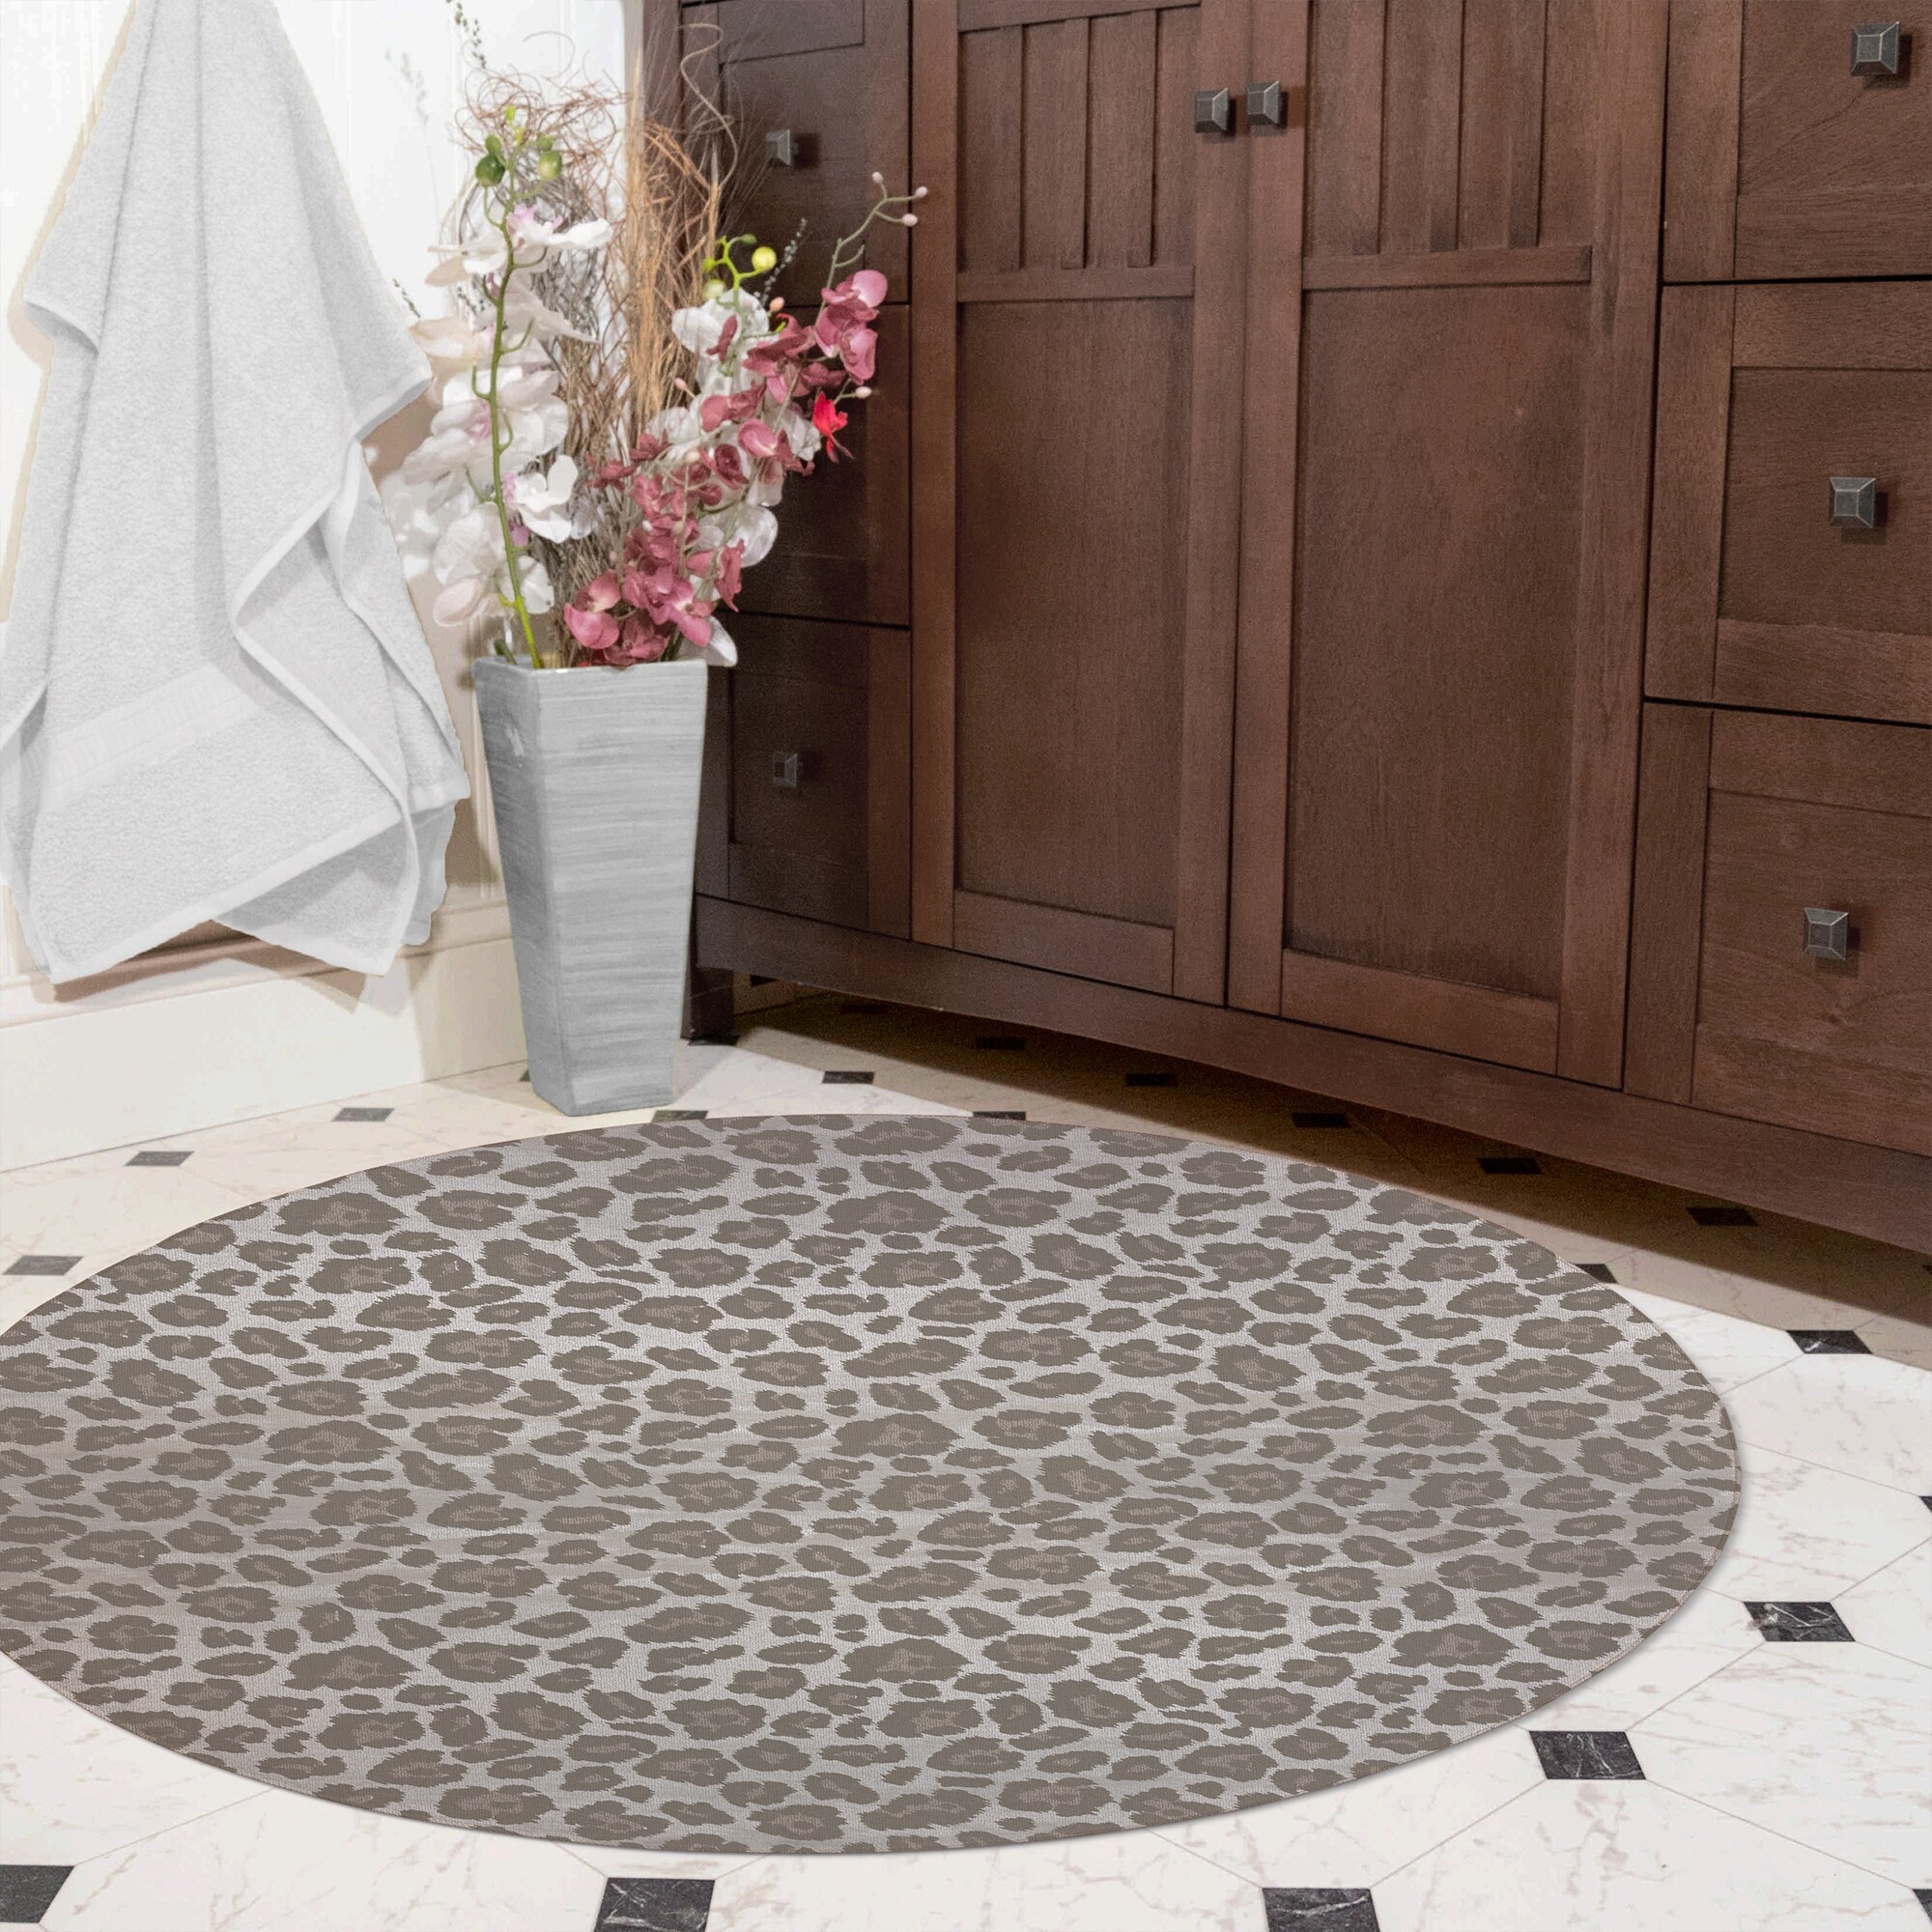 https://ak1.ostkcdn.com/images/products/is/images/direct/9c4b3cb1c57ad61d66ab4b1138dcf4bbe656aaee/CHEETAH-TAUPE-Bath-Rug-By-Kavka-Designs.jpg